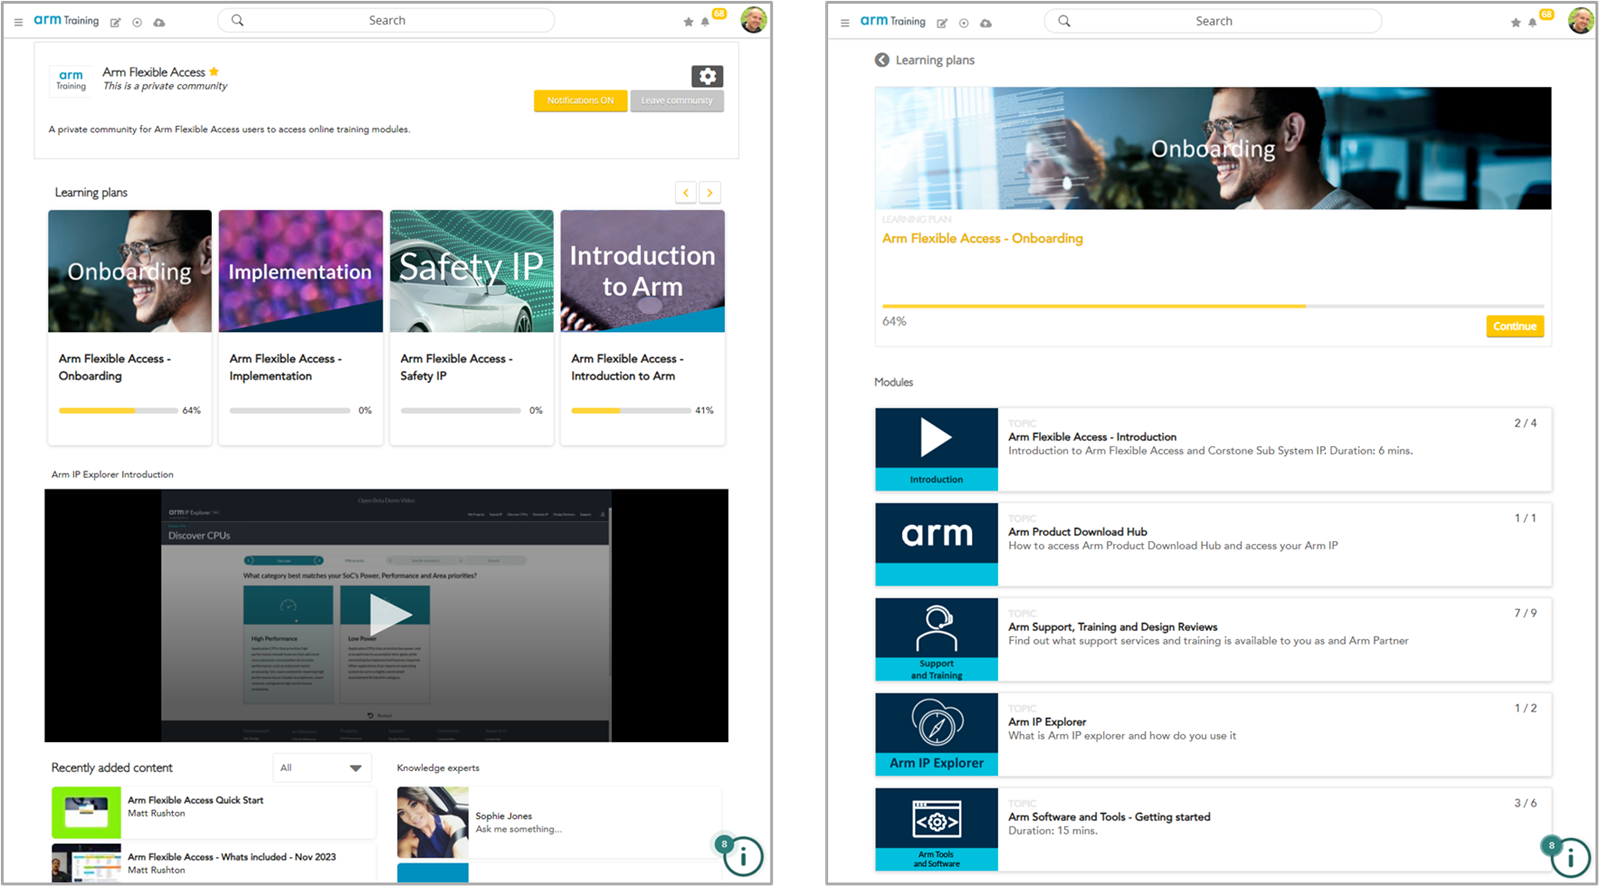 Screen capture of Arm Flexible Access Onboarding online learning screens